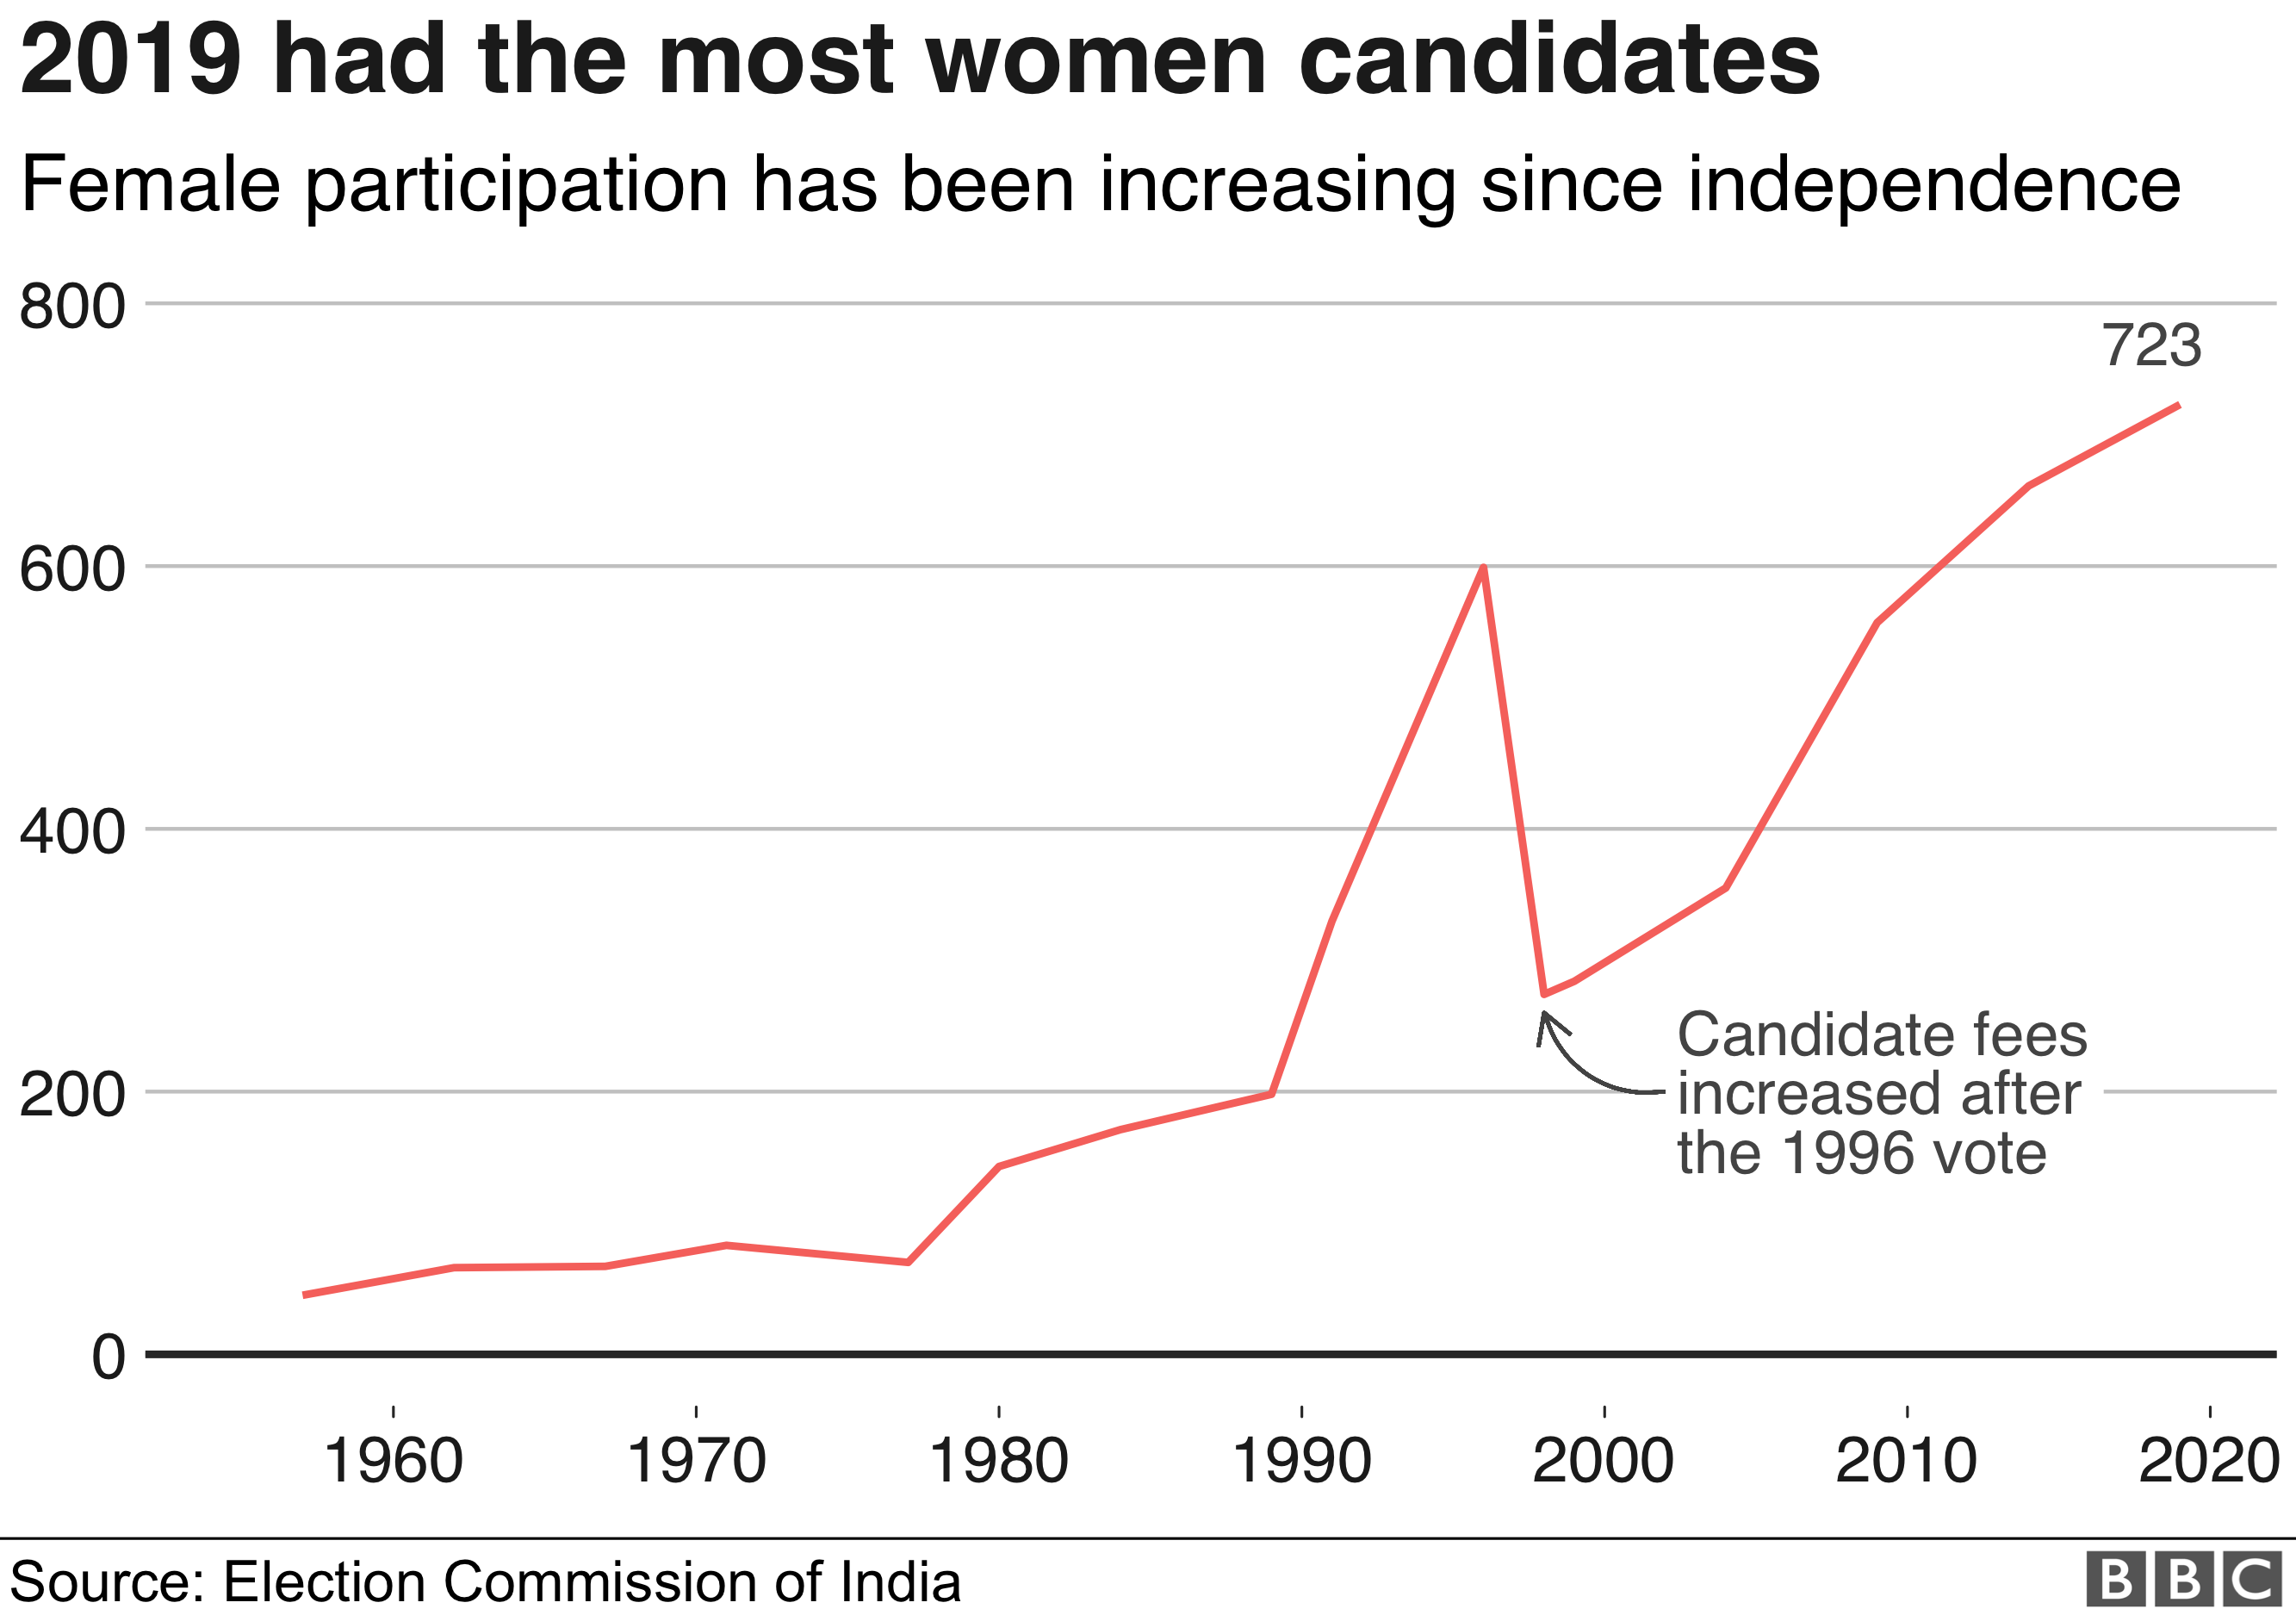 Female candidates over time